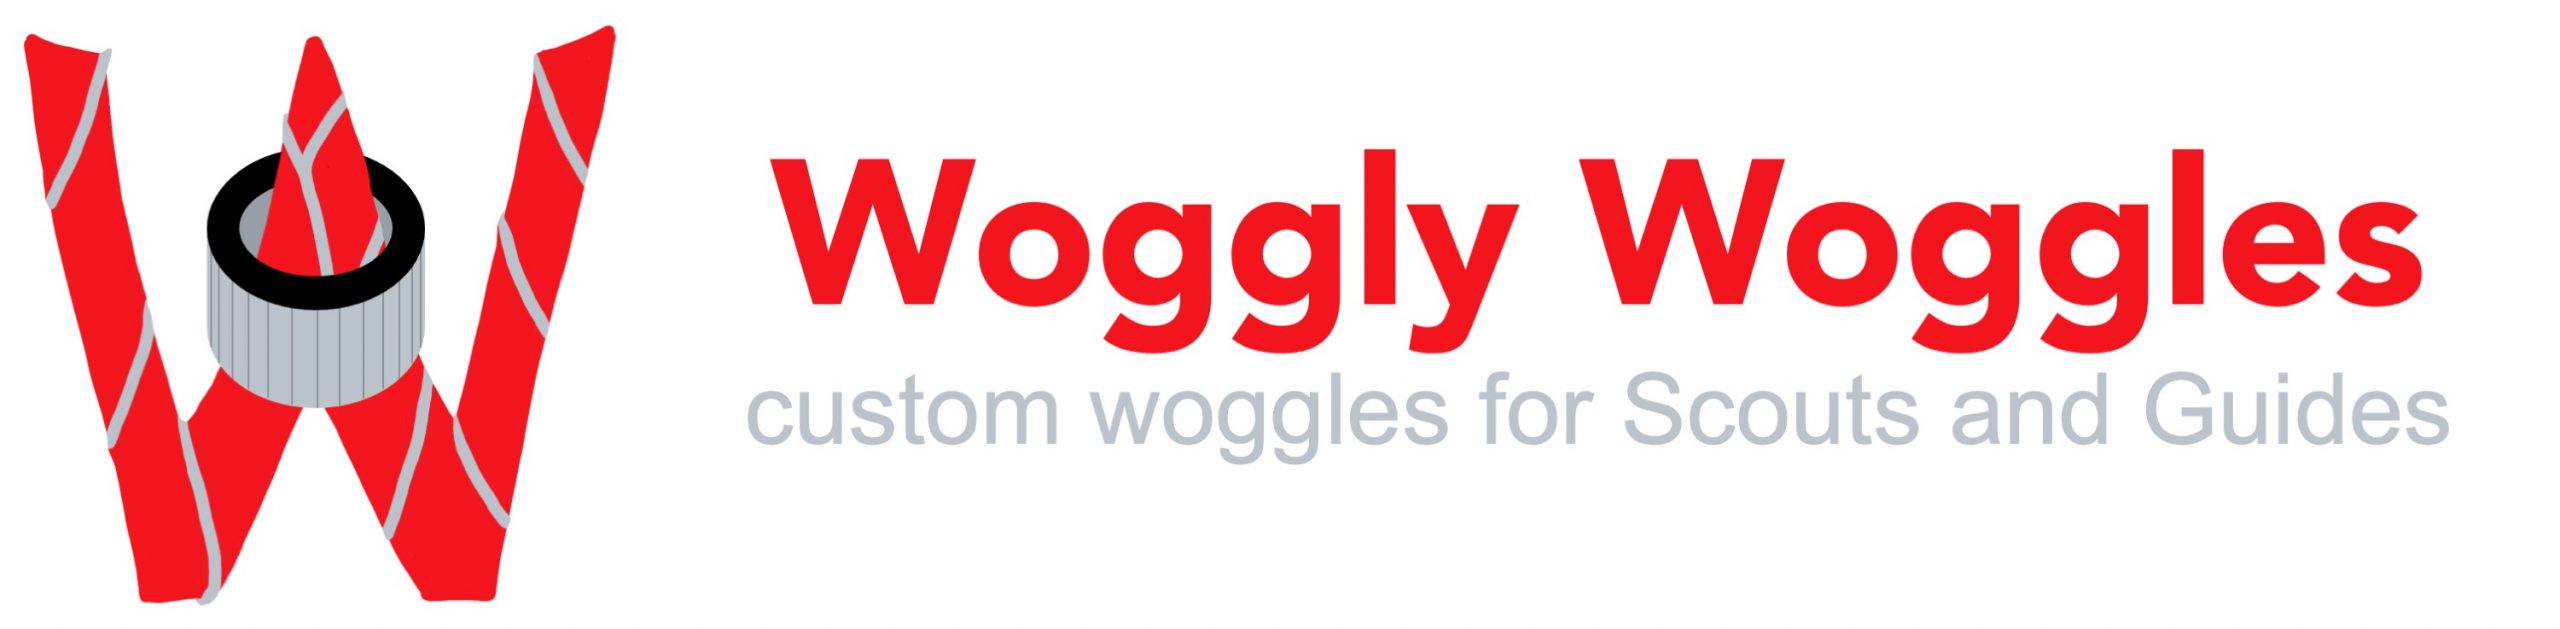 Woggly Woggles